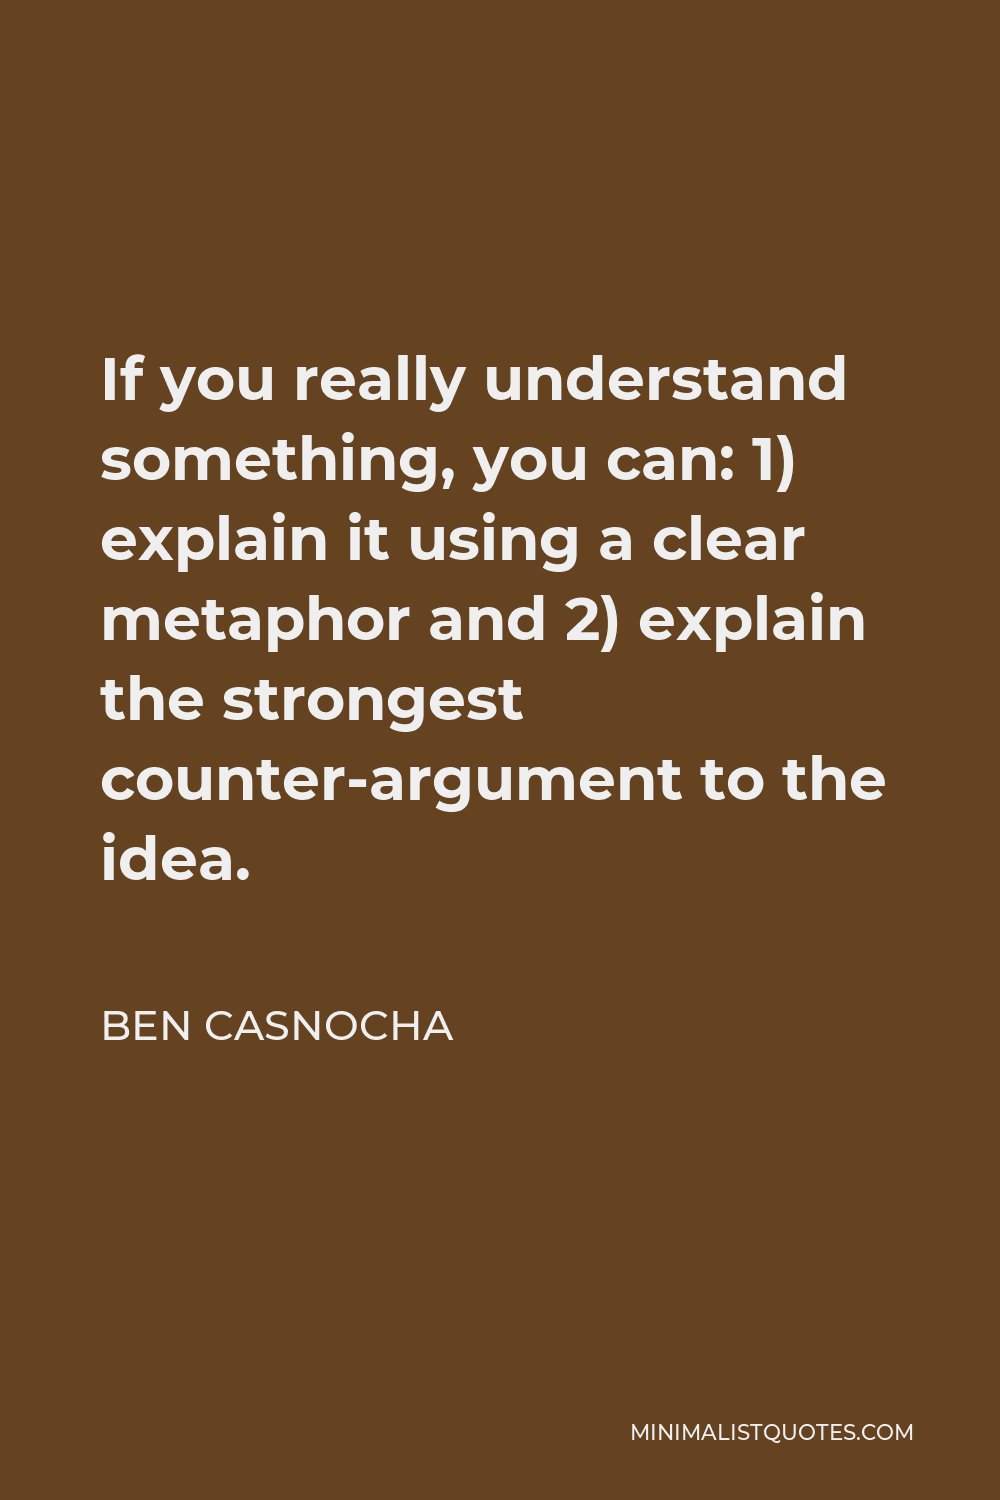 Ben Casnocha Quote - If you really understand something, you can: 1) explain it using a clear metaphor and 2) explain the strongest counter-argument to the idea.